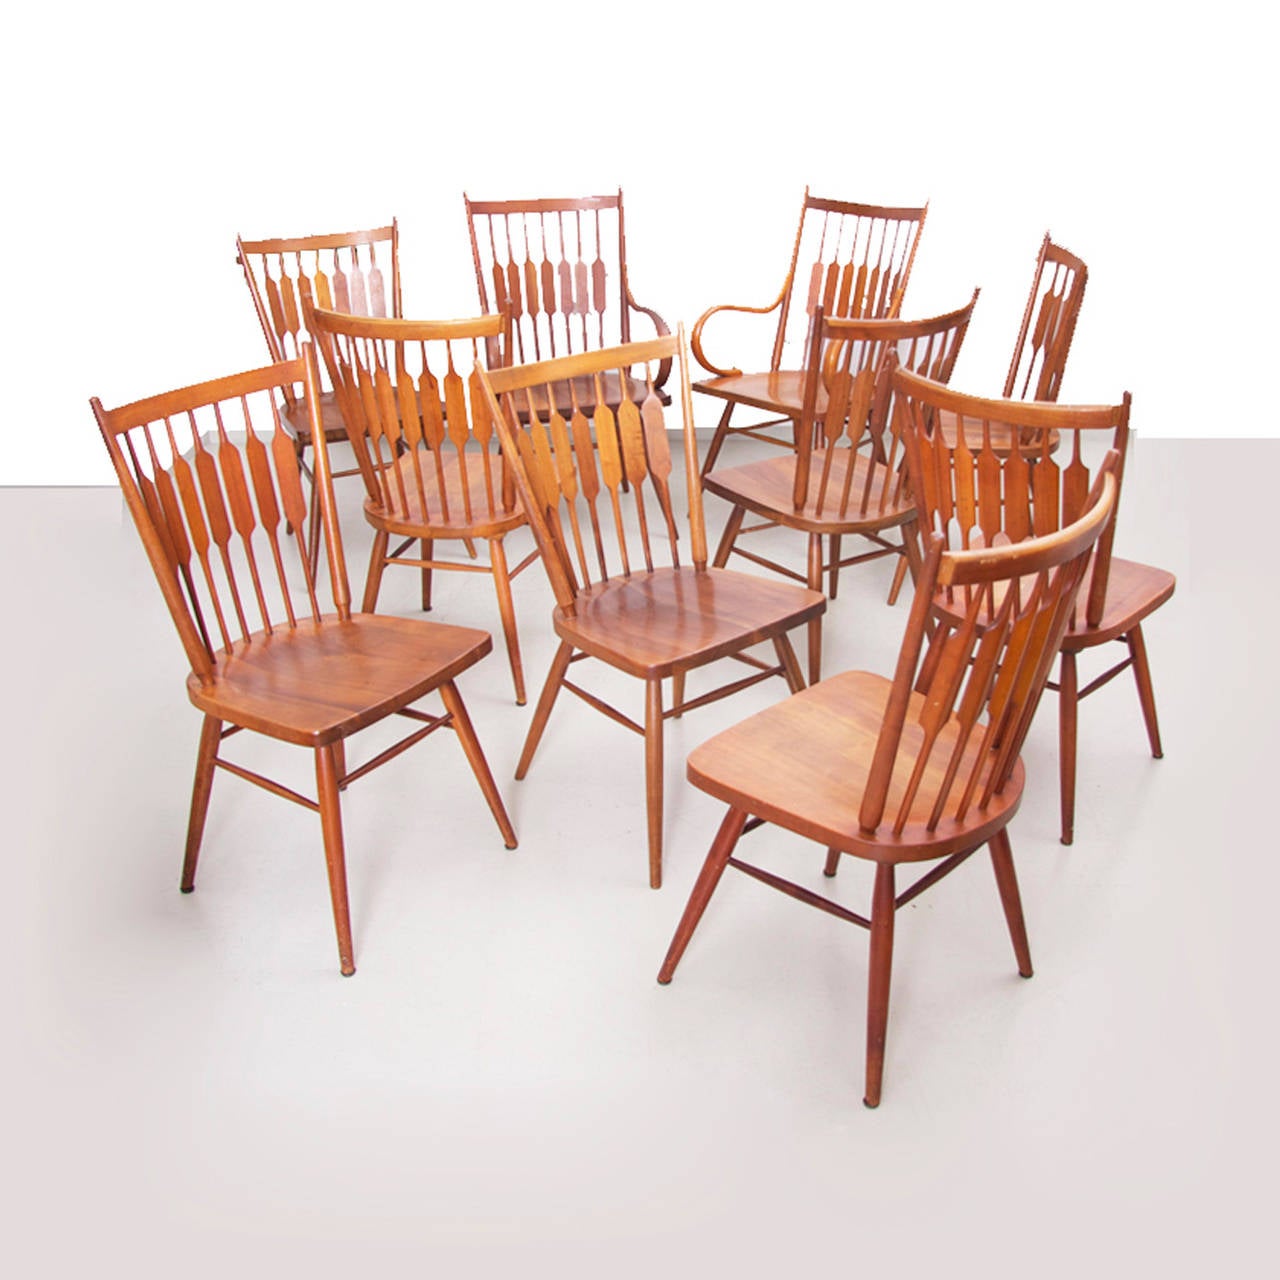 Rare set of ten Kipp Stewart chairs. Eight side and two armchairs in solid walnut by Drexel.